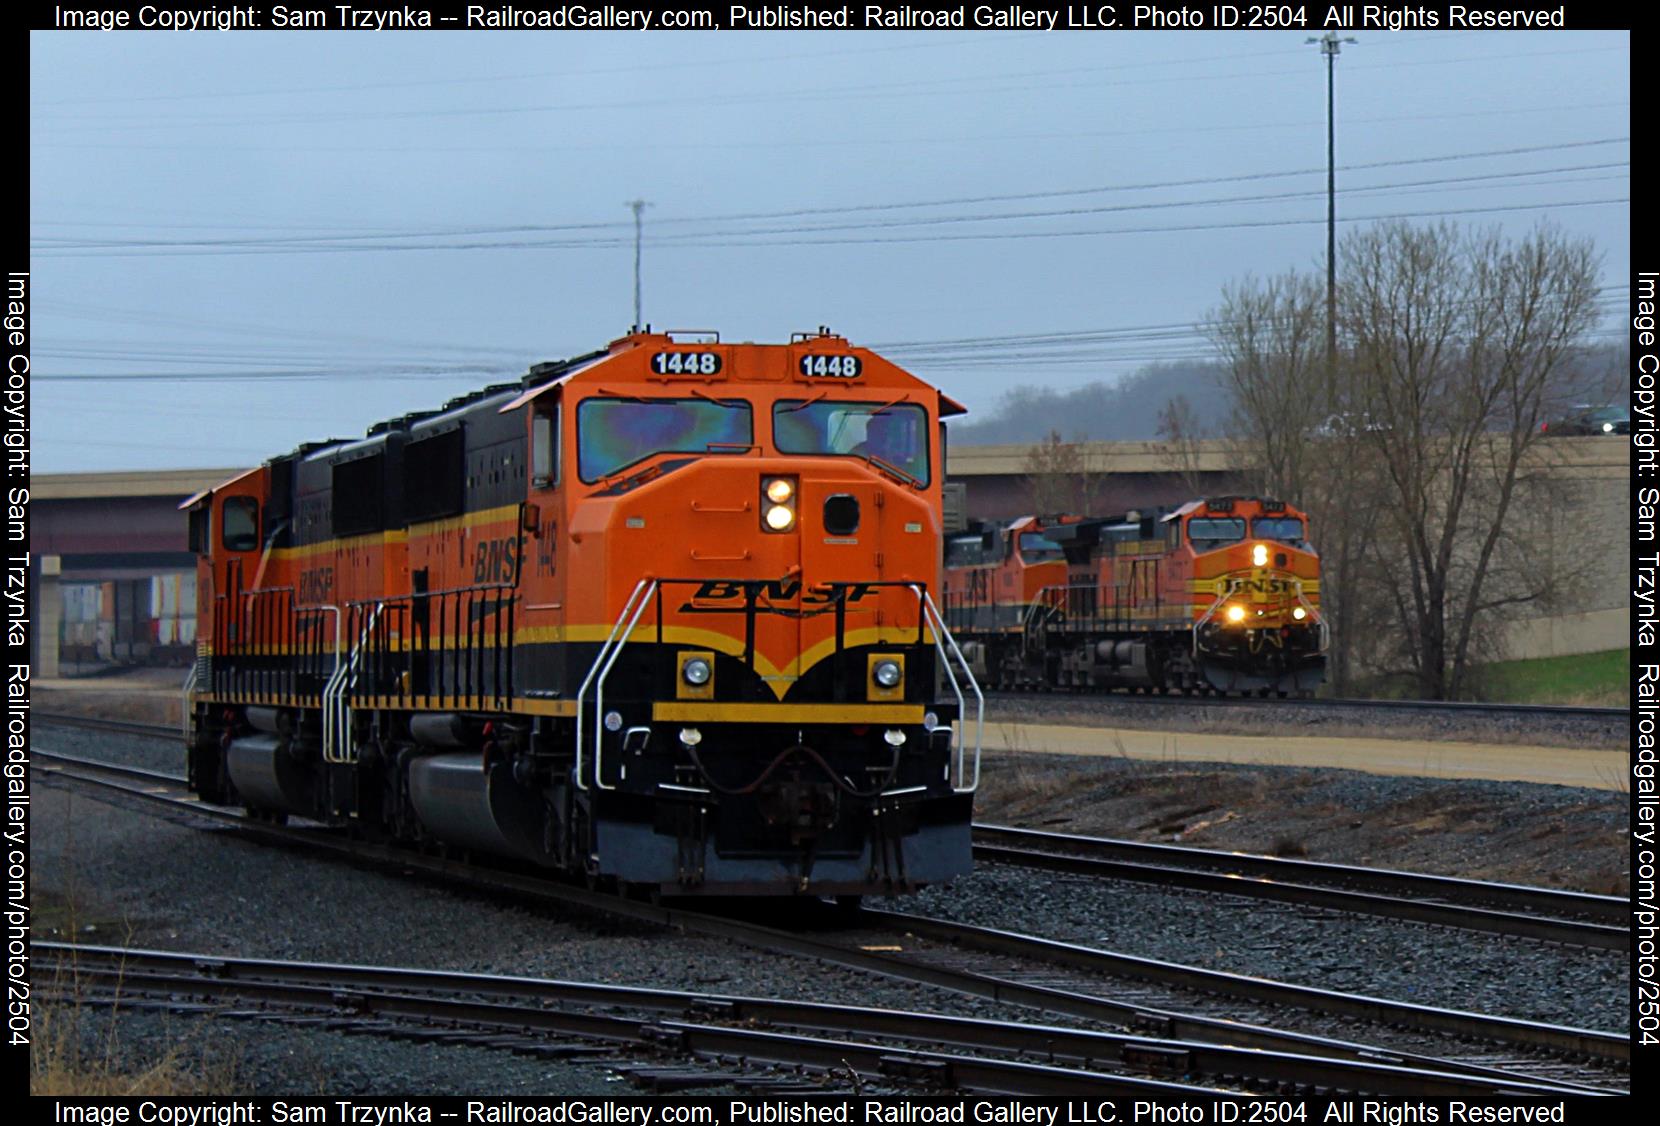 BNSF 1448 is a class EMD SD60M and  is pictured in Newport, Minnesota, USA.  This was taken along the BNSF St. Paul Subdivision on the BNSF Railway. Photo Copyright: Sam Trzynka uploaded to Railroad Gallery on 11/27/2023. This photograph of BNSF 1448 was taken on Sunday, May 01, 2022. All Rights Reserved. 